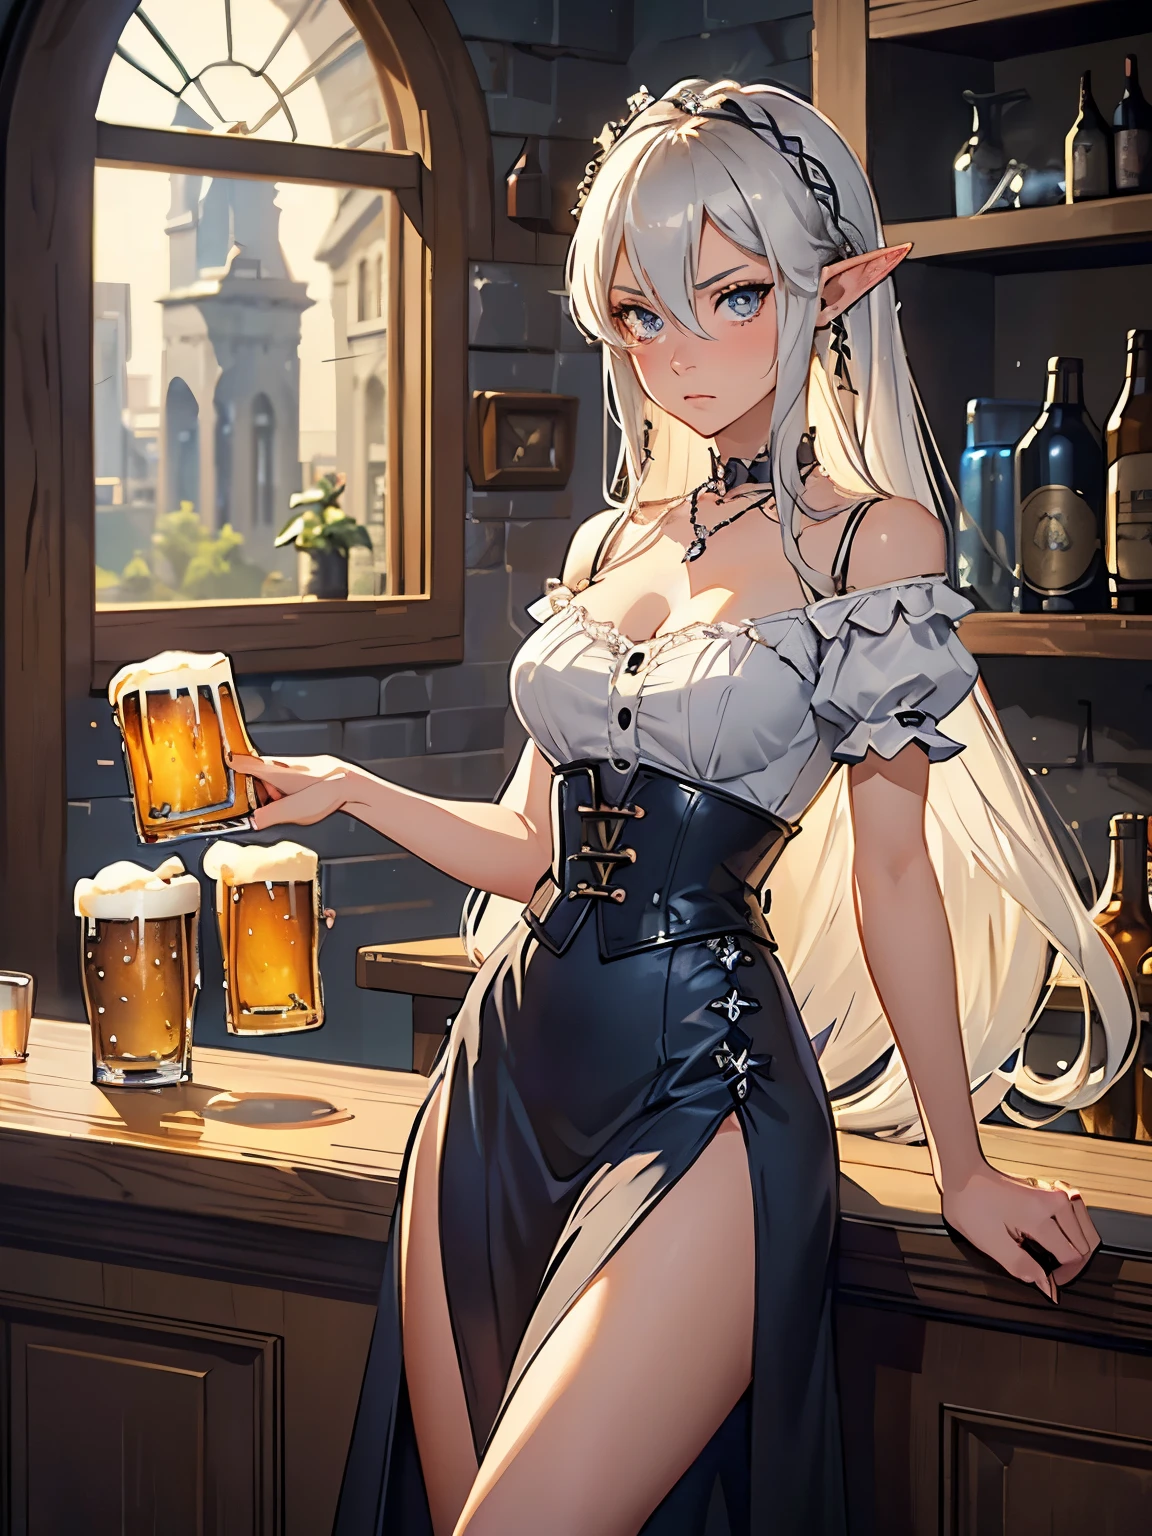 masterpiece, high quality, 1_woman, (upper body), sitting, mature, tall, beautiful, exotic, long elf ears, platinum blonde long hair, gray colored eyes, dark eyeliner, looking at the viewer, depressed expression, blushing, ((holding glass of beer)), medium_bust, cleavage, puffy shirt, white blouse, (((short sleeves))), bare_shoulders, dark blue high waist underbust dress, four buttons at waist, hair ornament, (blue rose in hair), flounce hemline, long skirt with slit, wearing (necklace with silver ring on it), rustic tavern, sitting at bar, window with stars, starry night,